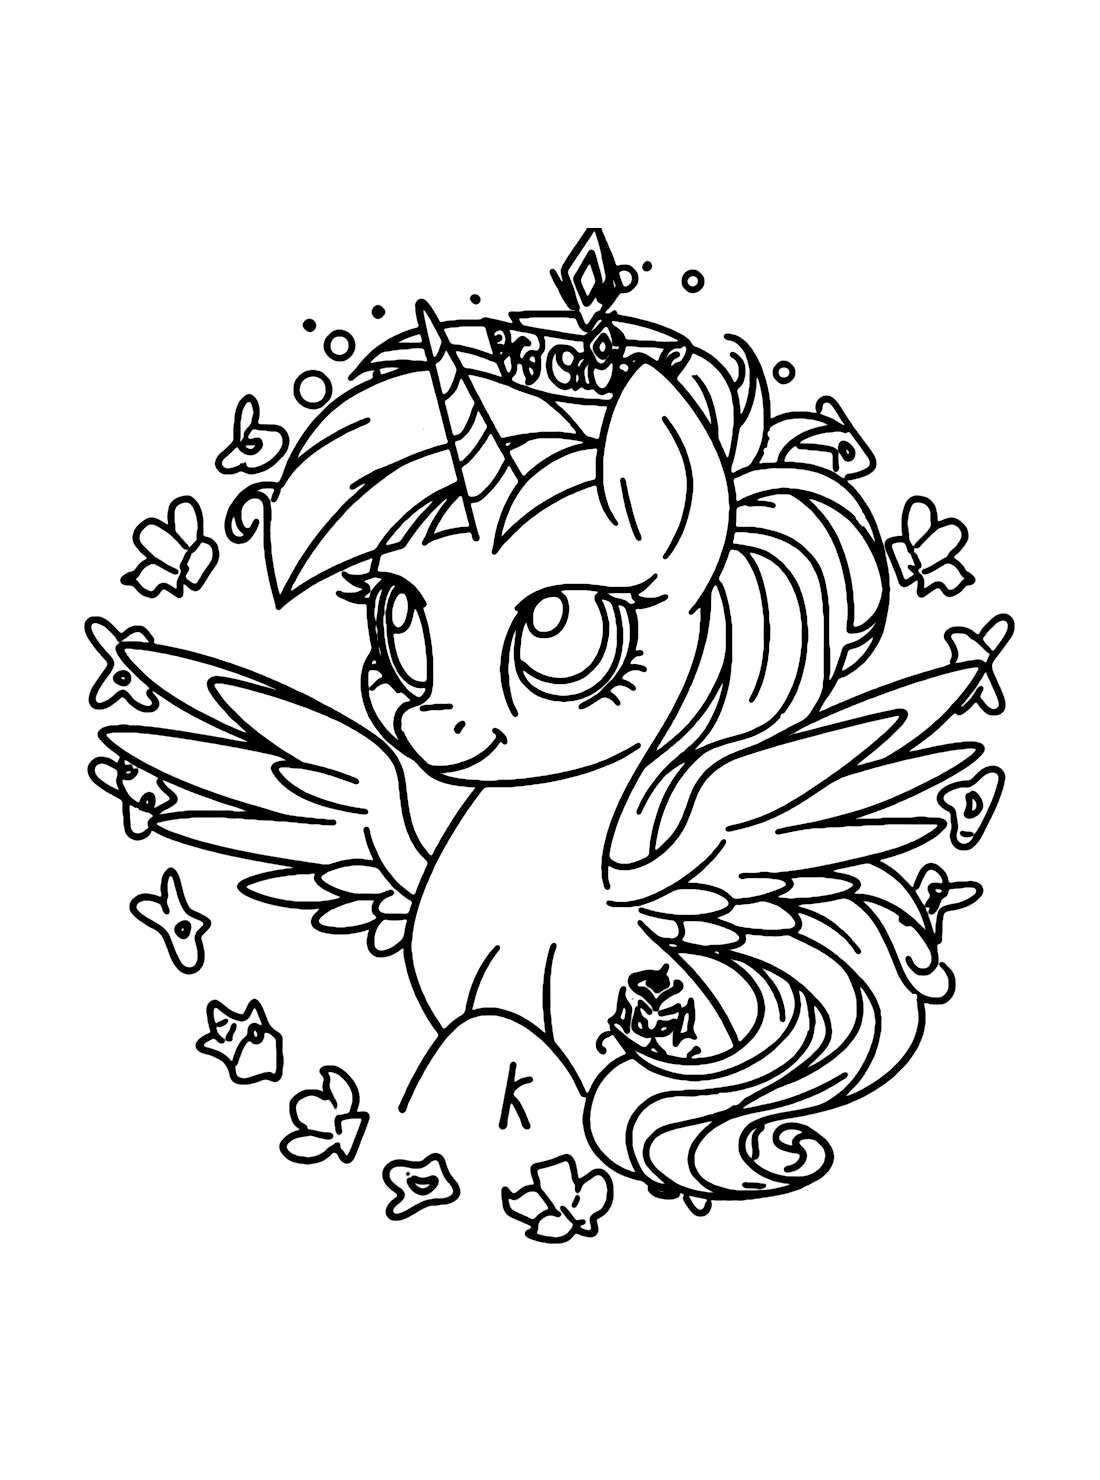 Rainbow Dash Coloring Pages Online